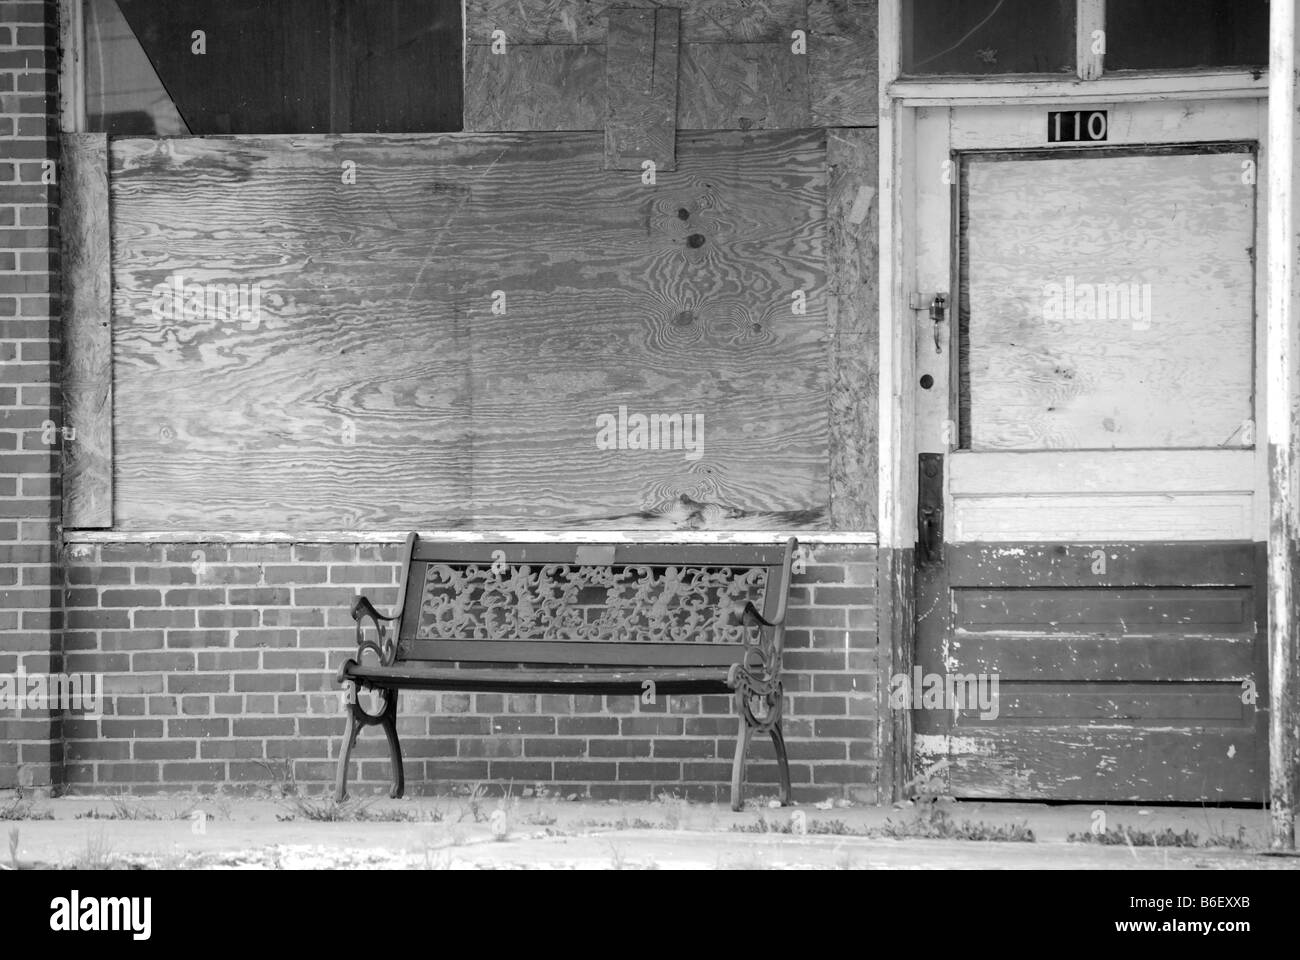 Closed down business in a small town, an affect of the bad economy in the United States Stock Photo